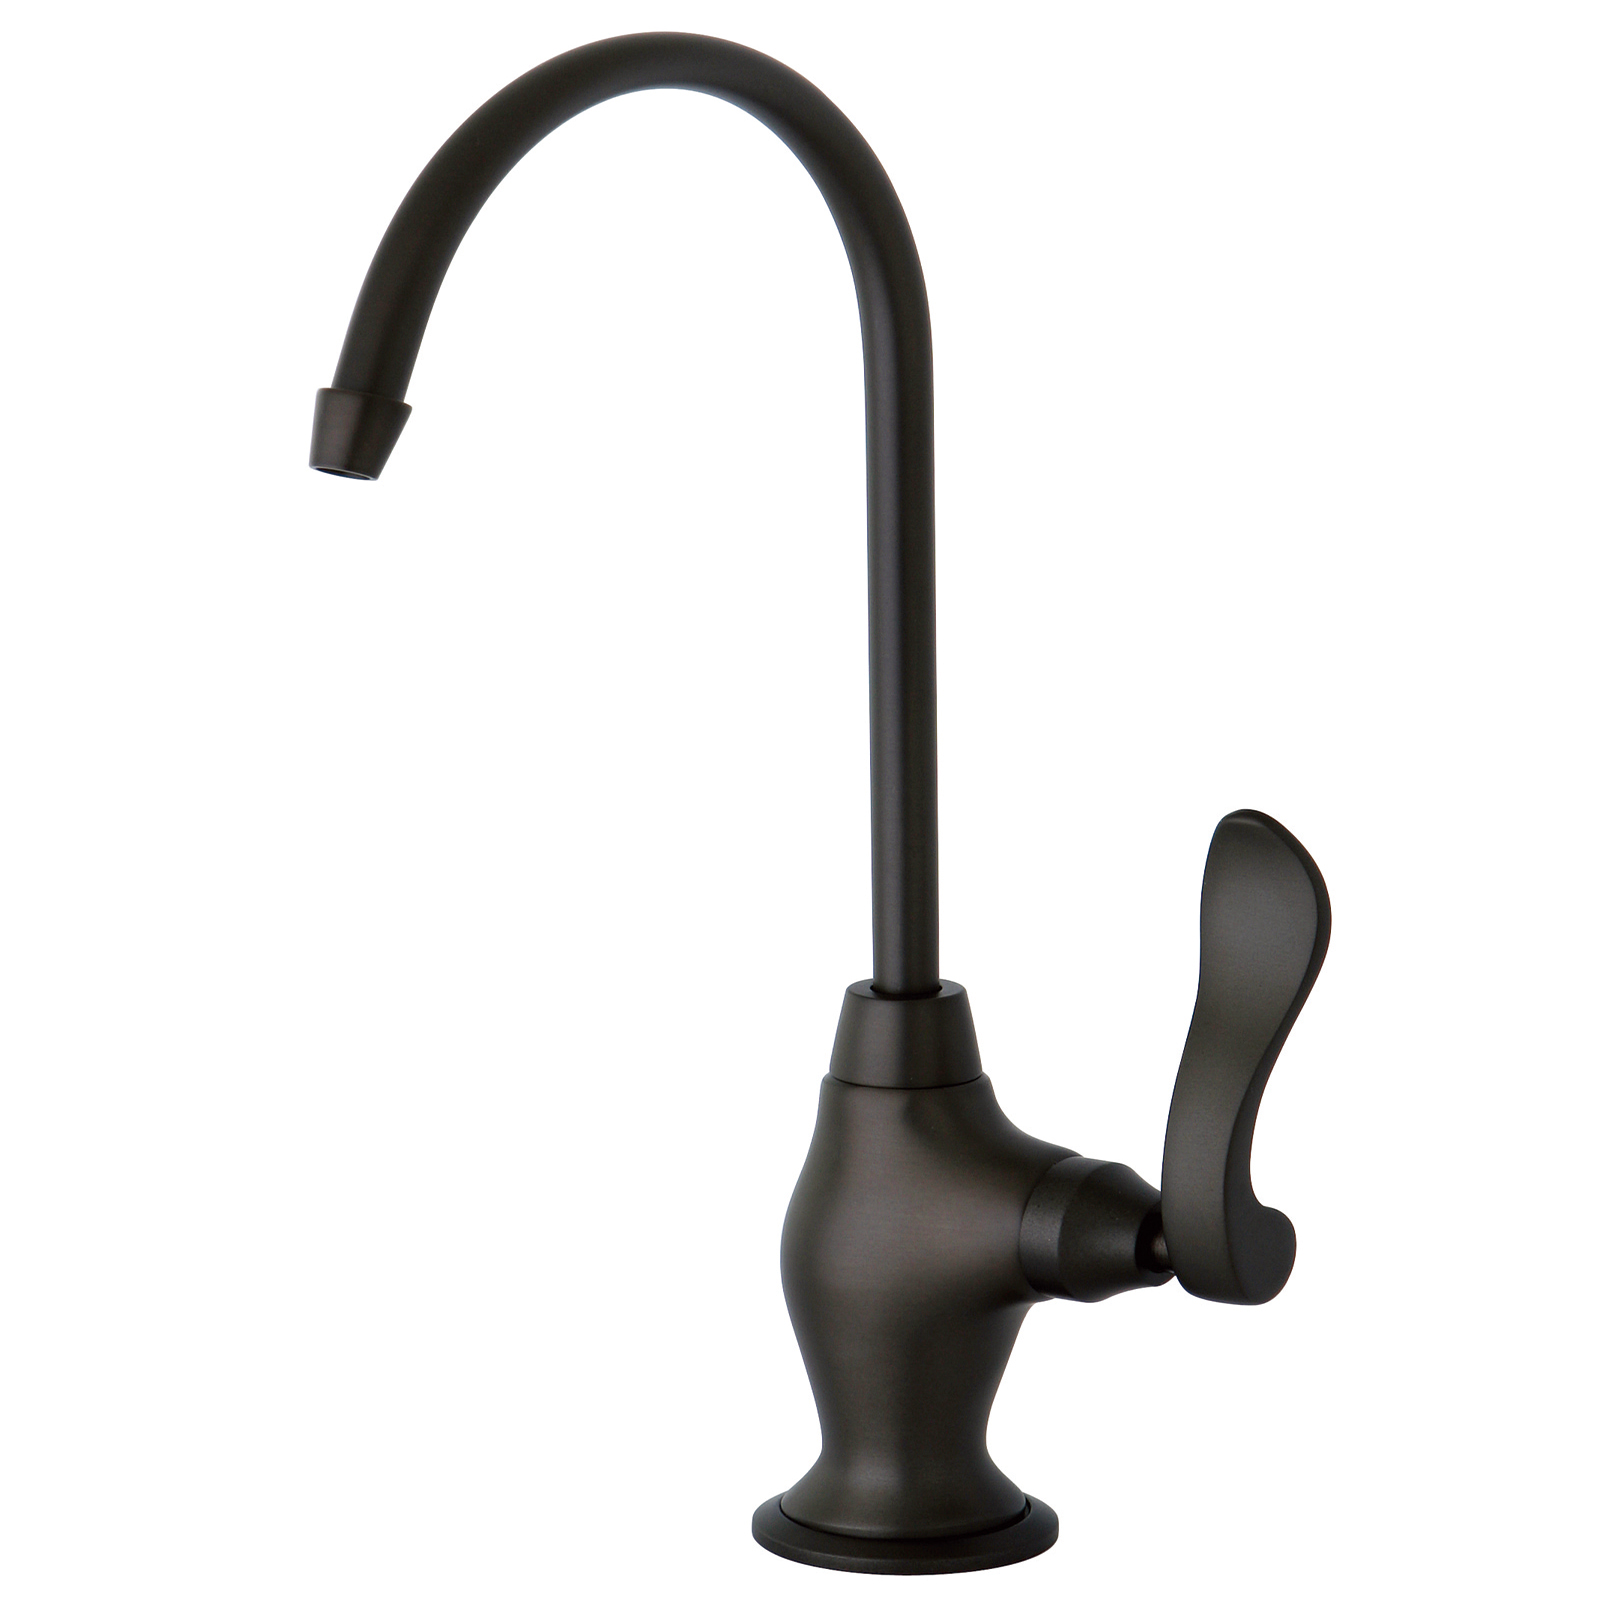 Kingston Brass KS3195NFL NuWave French Cold Water Filtration Faucet, Oil Rubbed Bronze